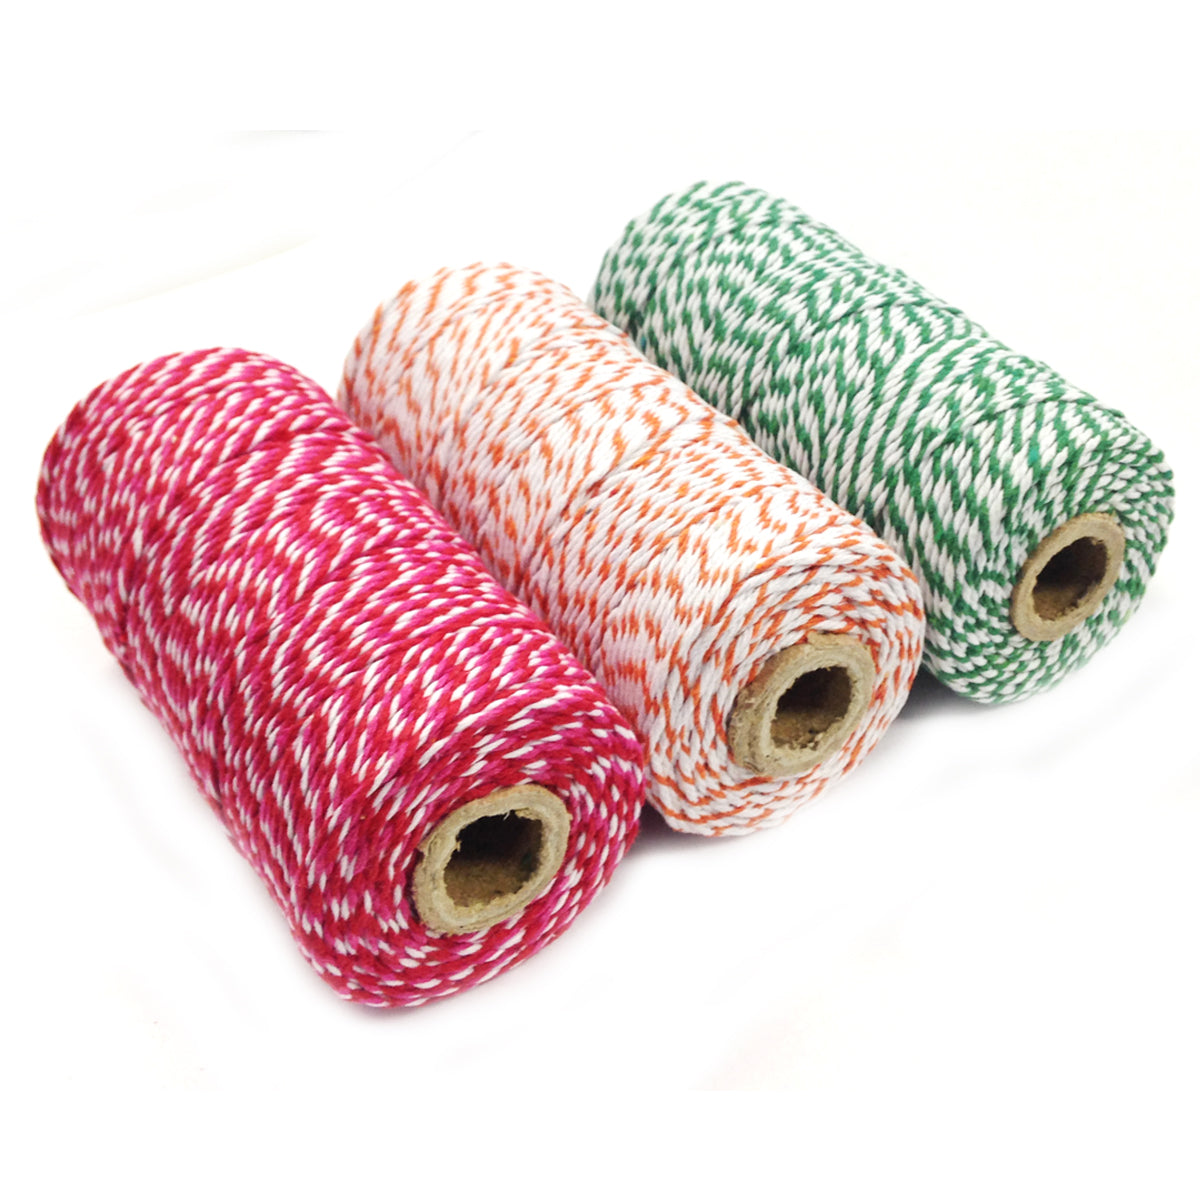 Wrapables Cotton Baker's Twine 12ply 330 Yards (Set of 3 Spools x 110 Yards)